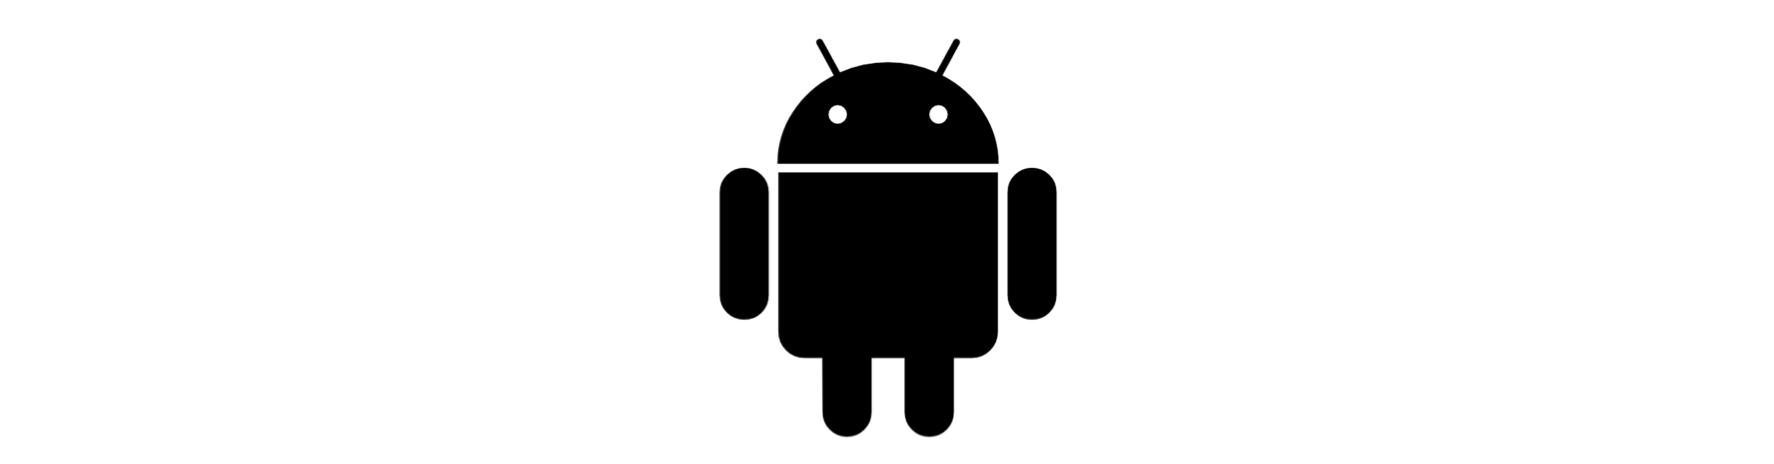 Android - Duo